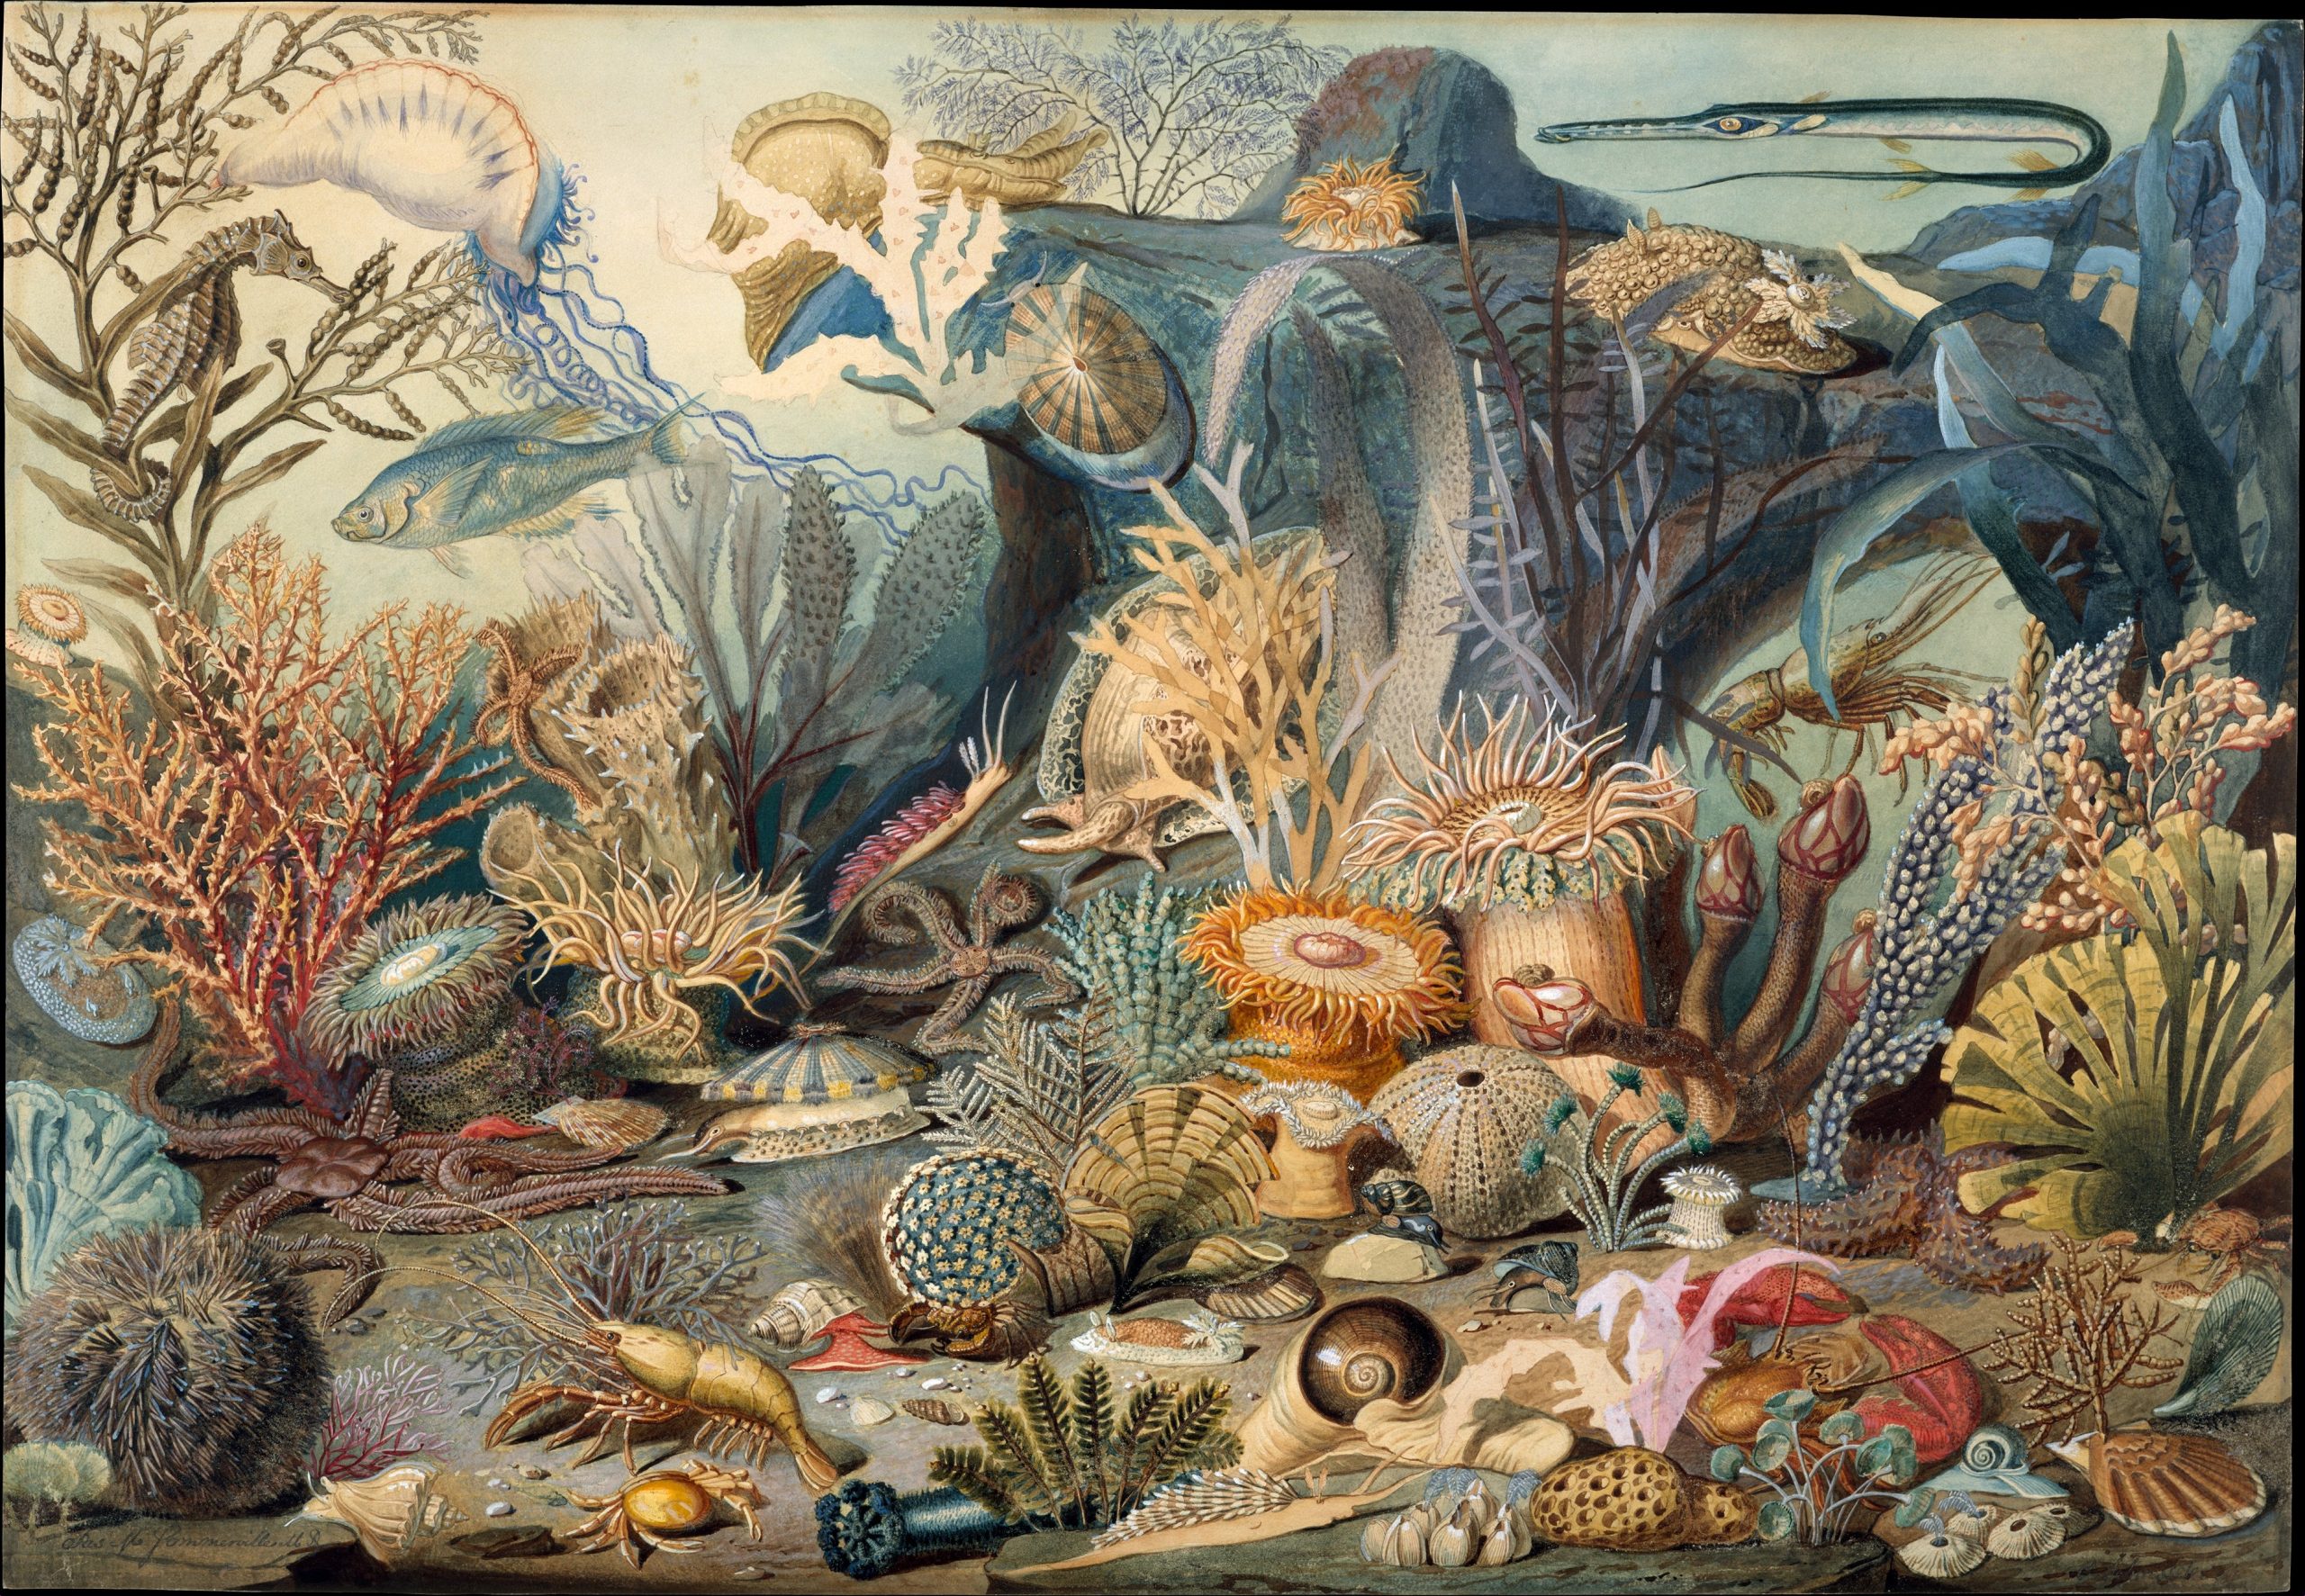 A seabed garden filled with diverse aquatic organisms